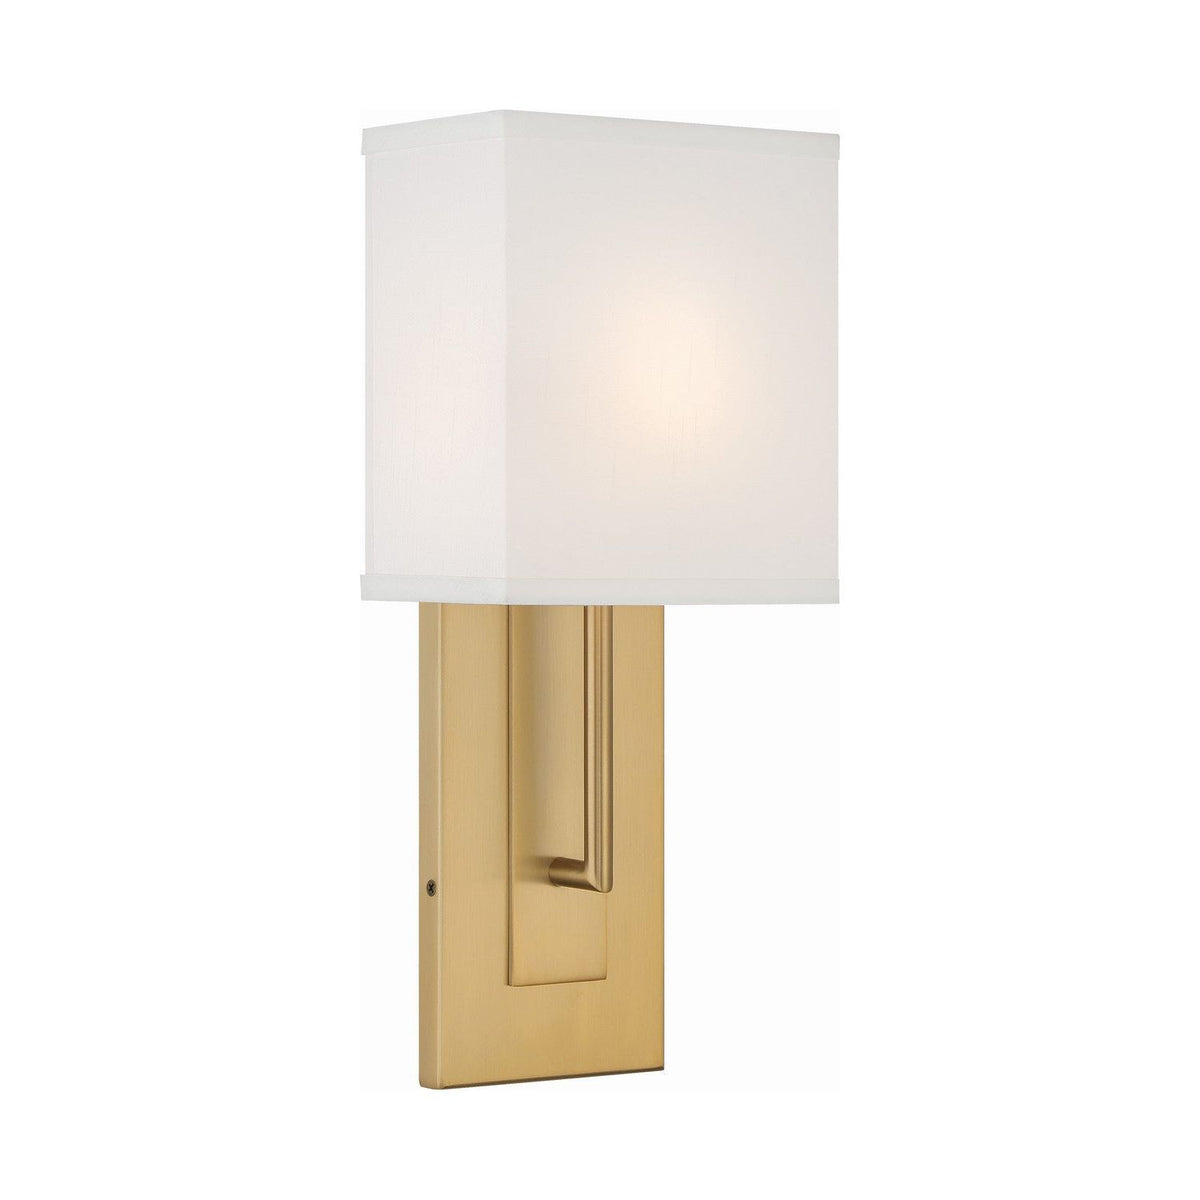 Crystorama - BRE-A3631-VG - One Light Wall Sconce - Brent - Vibrant Gold